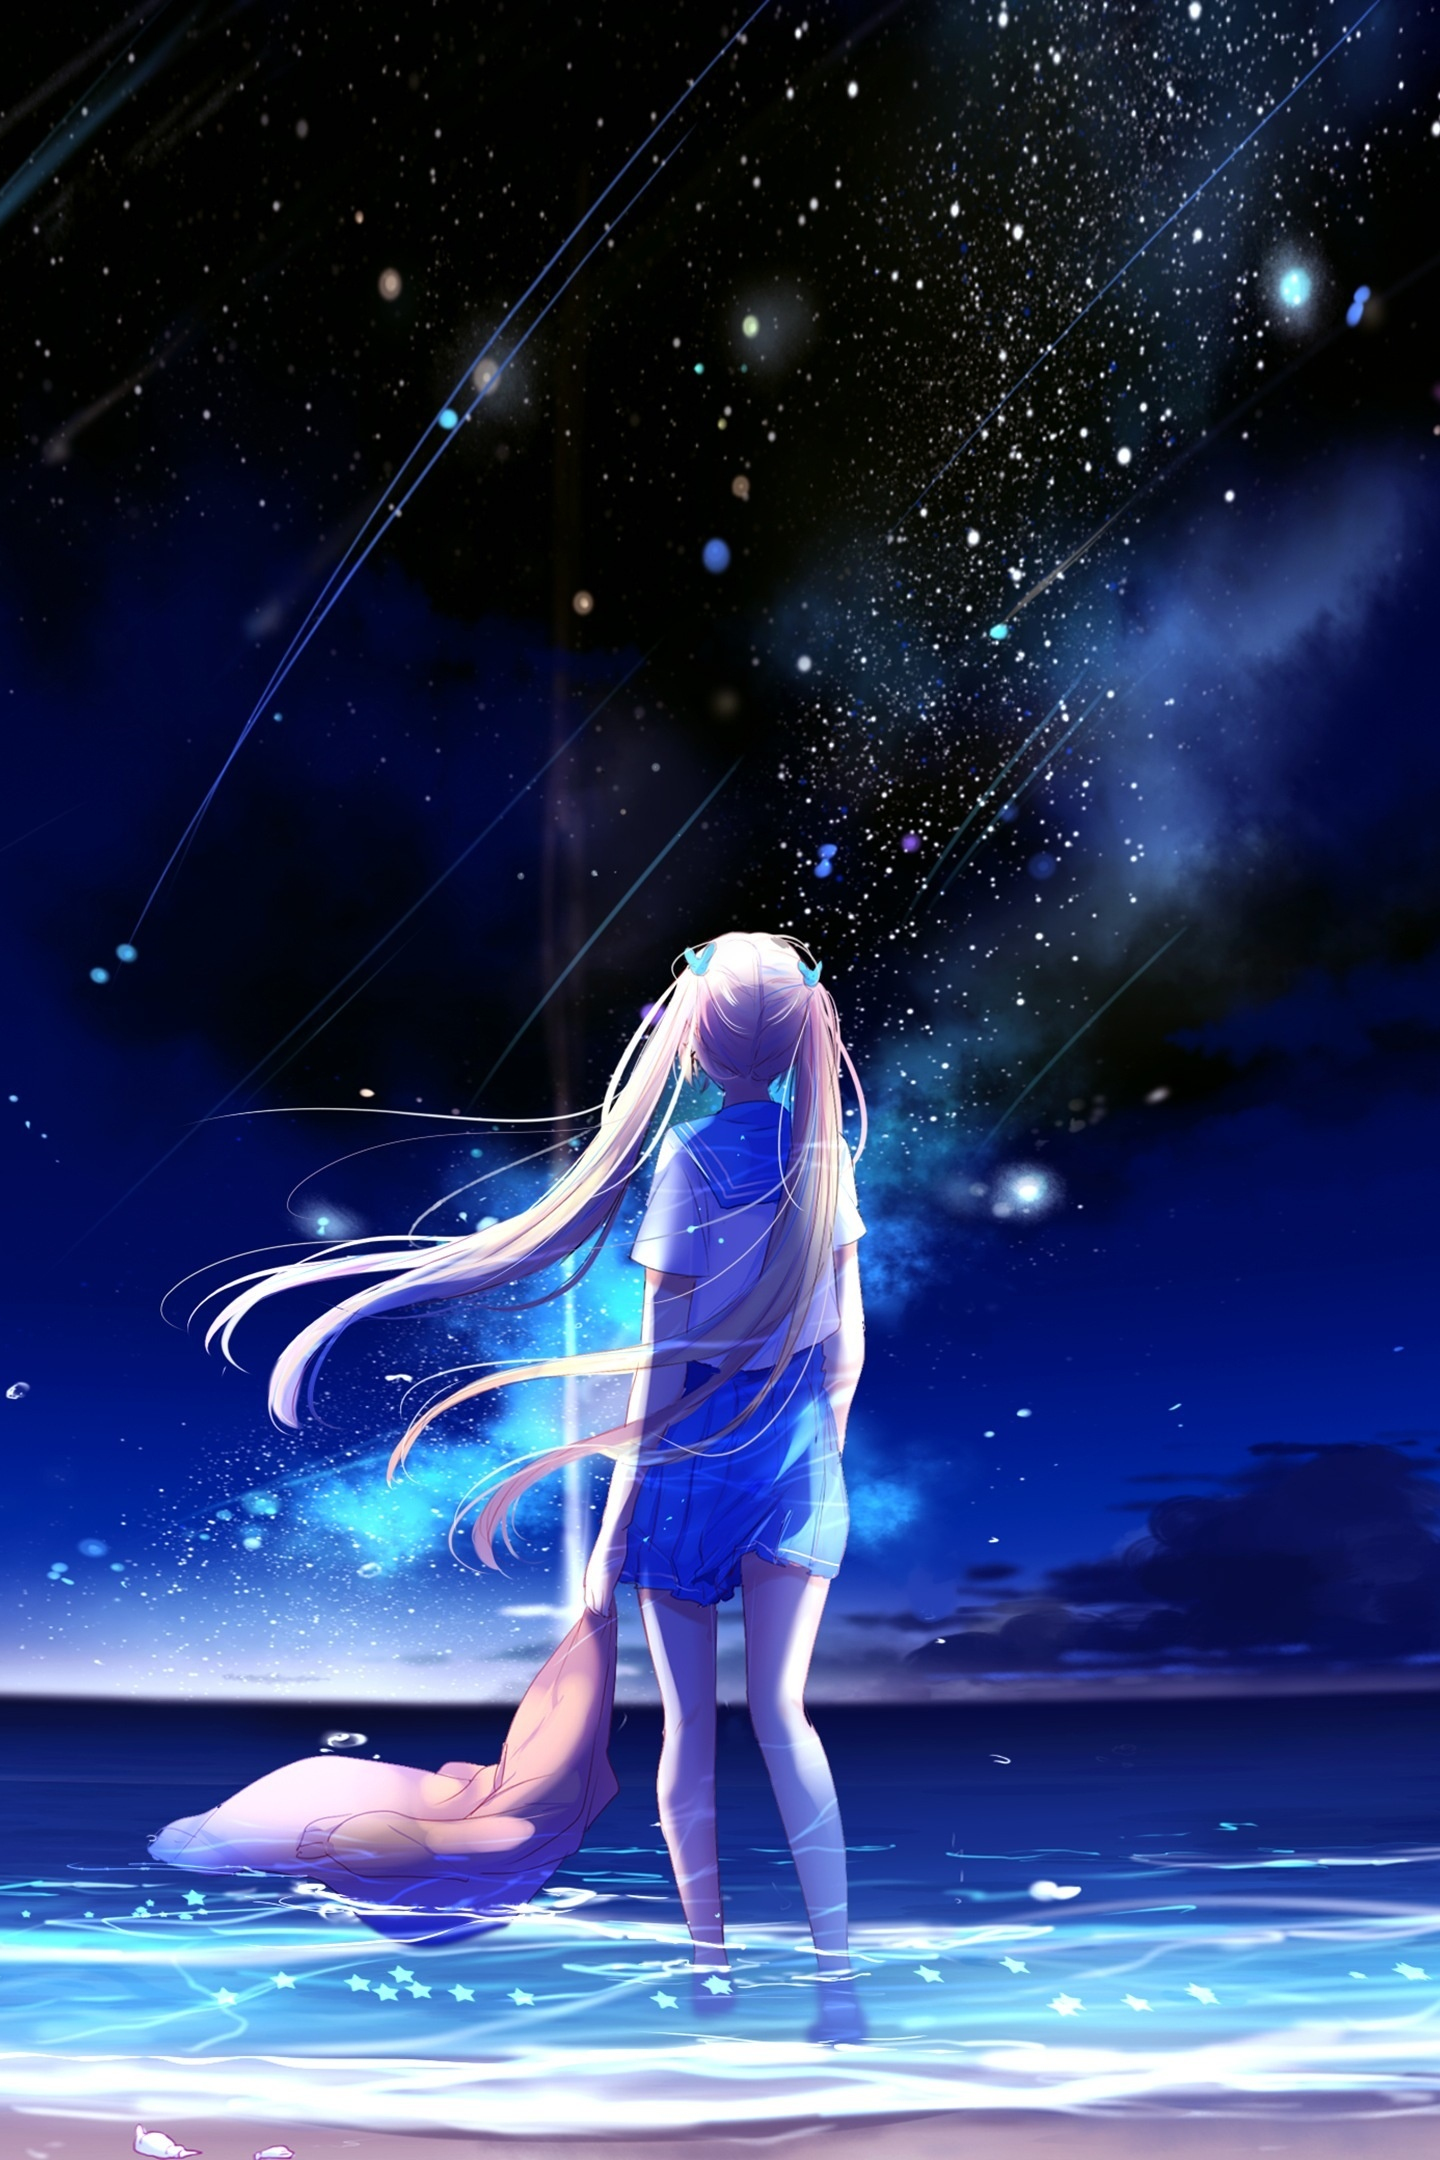 Pin by Cisne on Wallpapers | Anime scenery wallpaper, Purple galaxy  wallpaper, Galaxy wallpaper